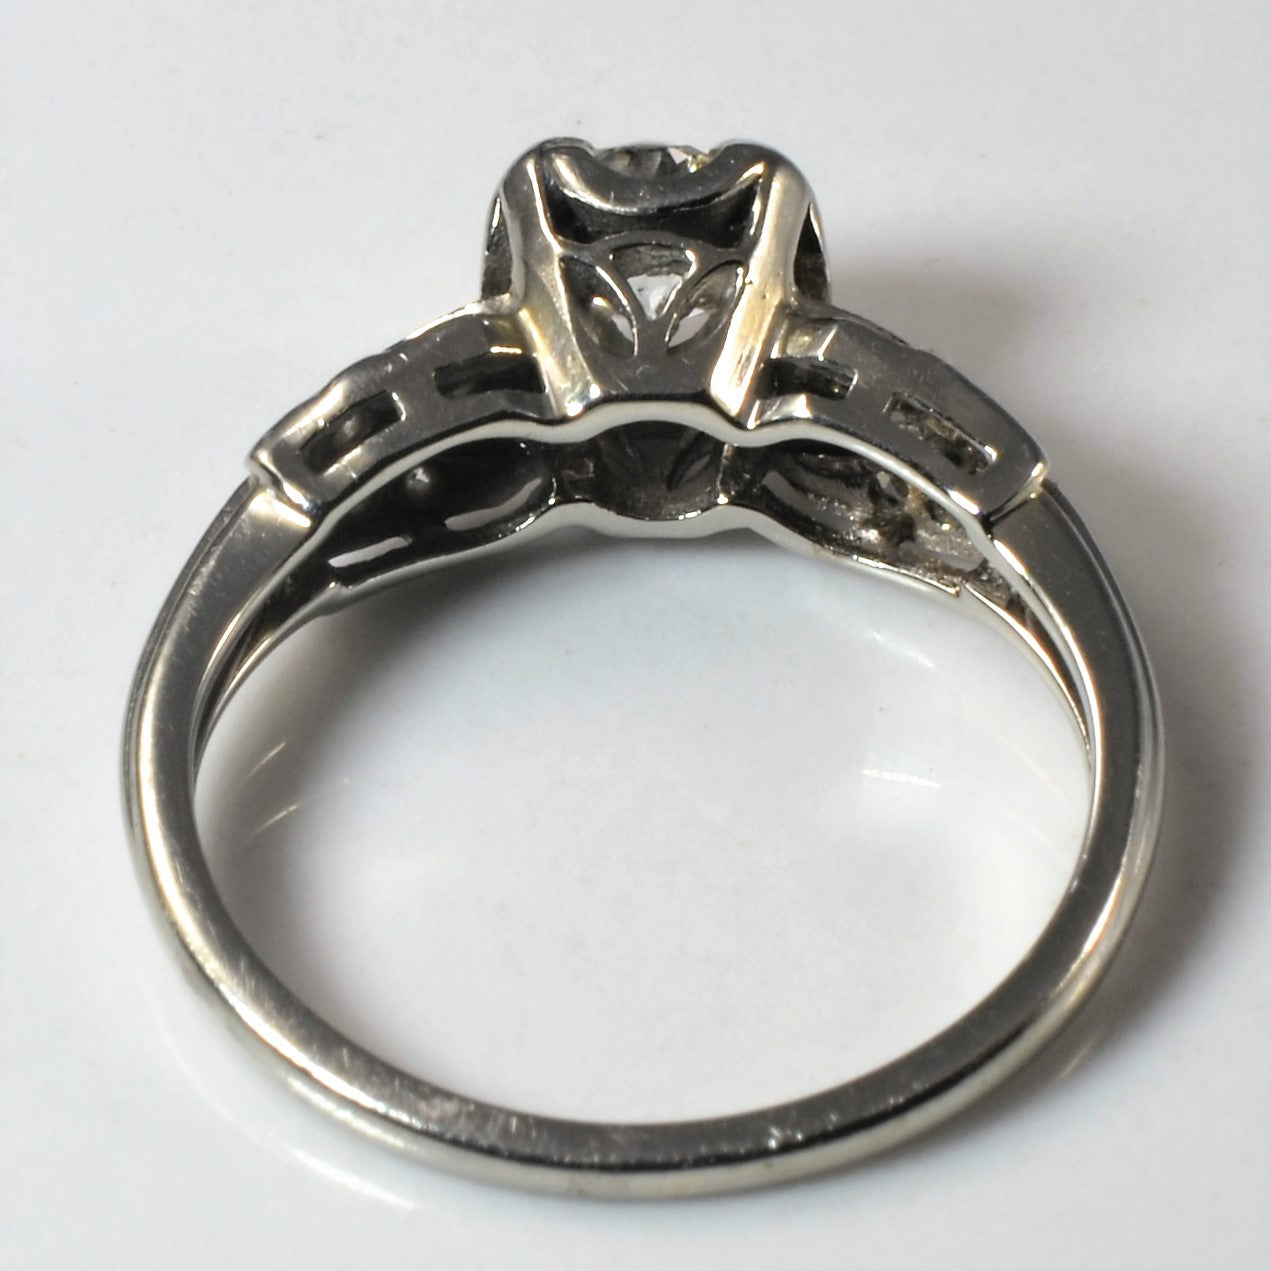 Intricate 1940s Engagement Ring | 0.46ctw | SZ 5 |